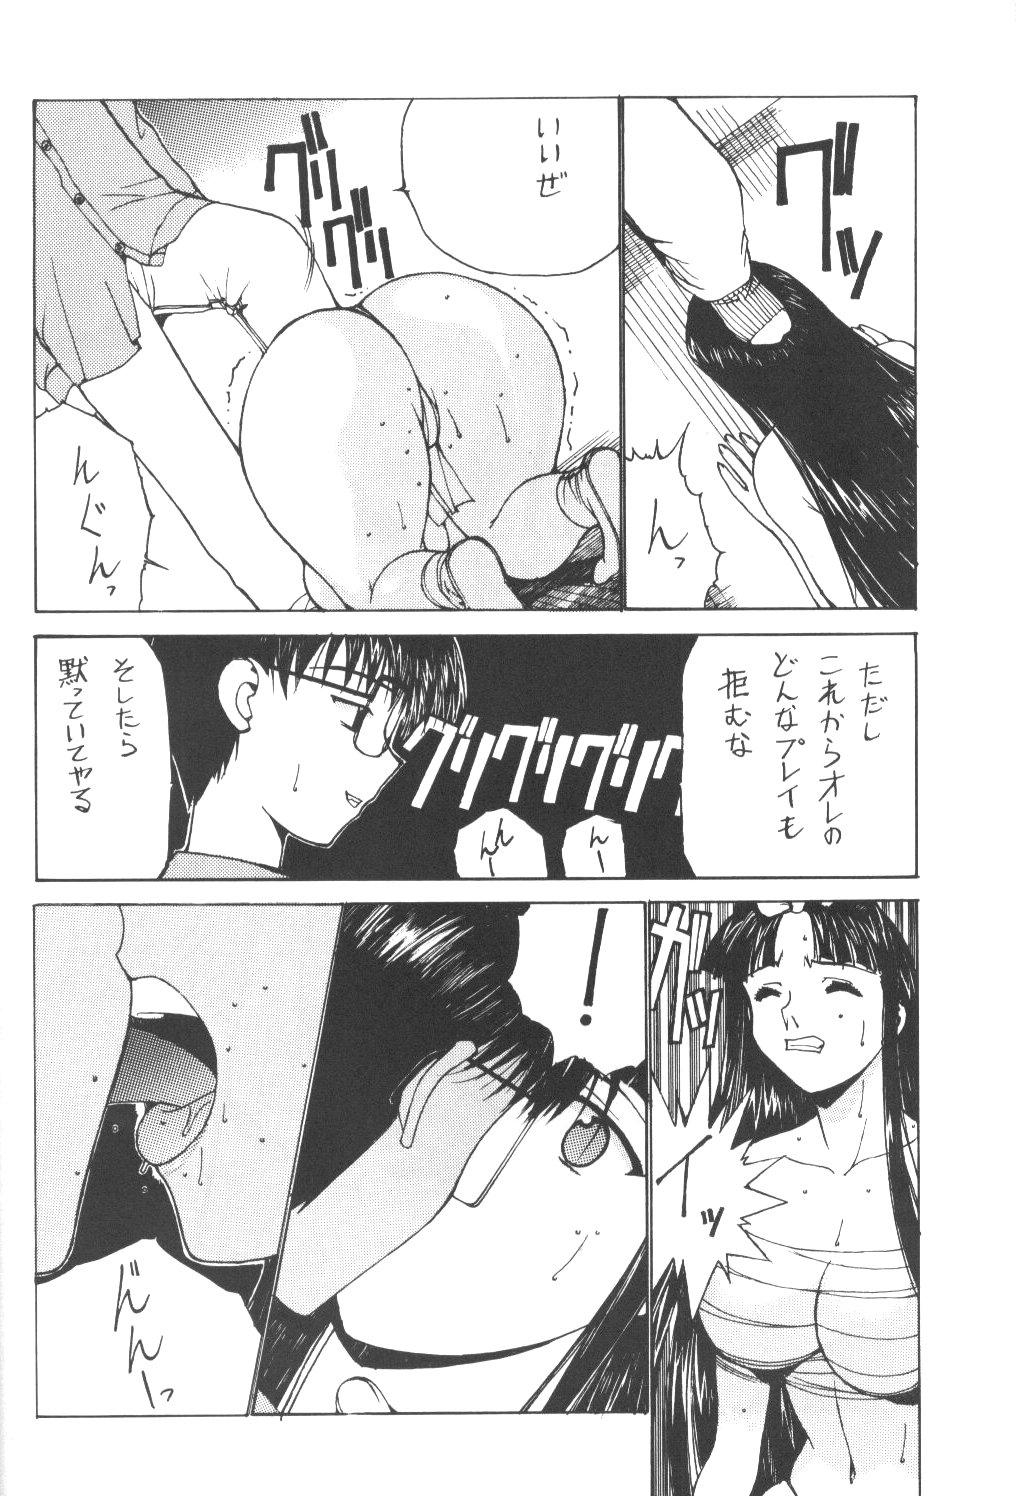 Bus Nadoriino Koufuku Ron - King of fighters Dead or alive Love hina Pee - Page 9